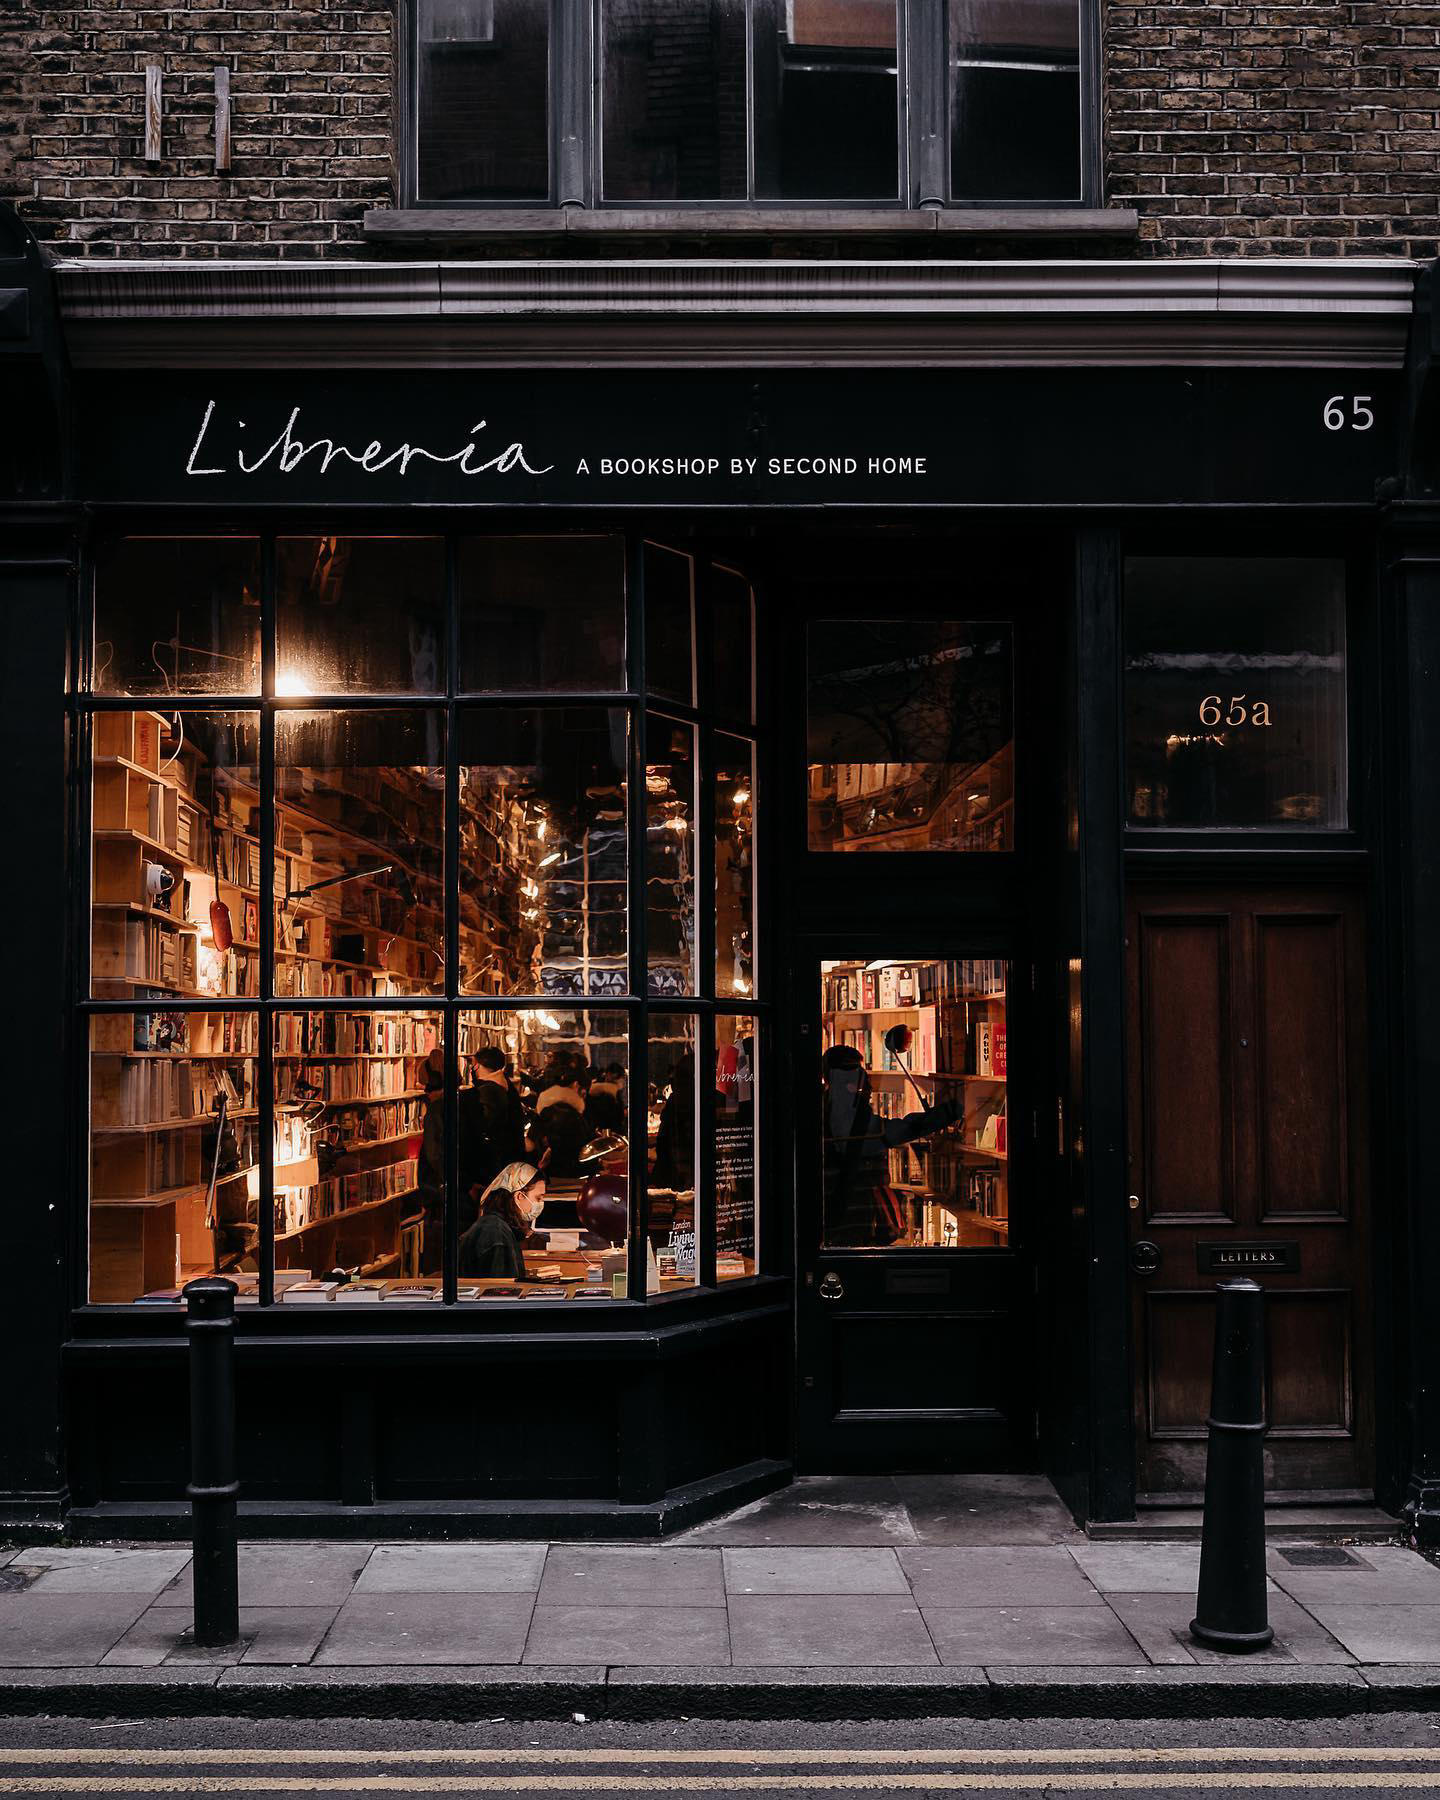 Jacintha Verdegaal - Impossible to find a London bookshop like this one and not go in